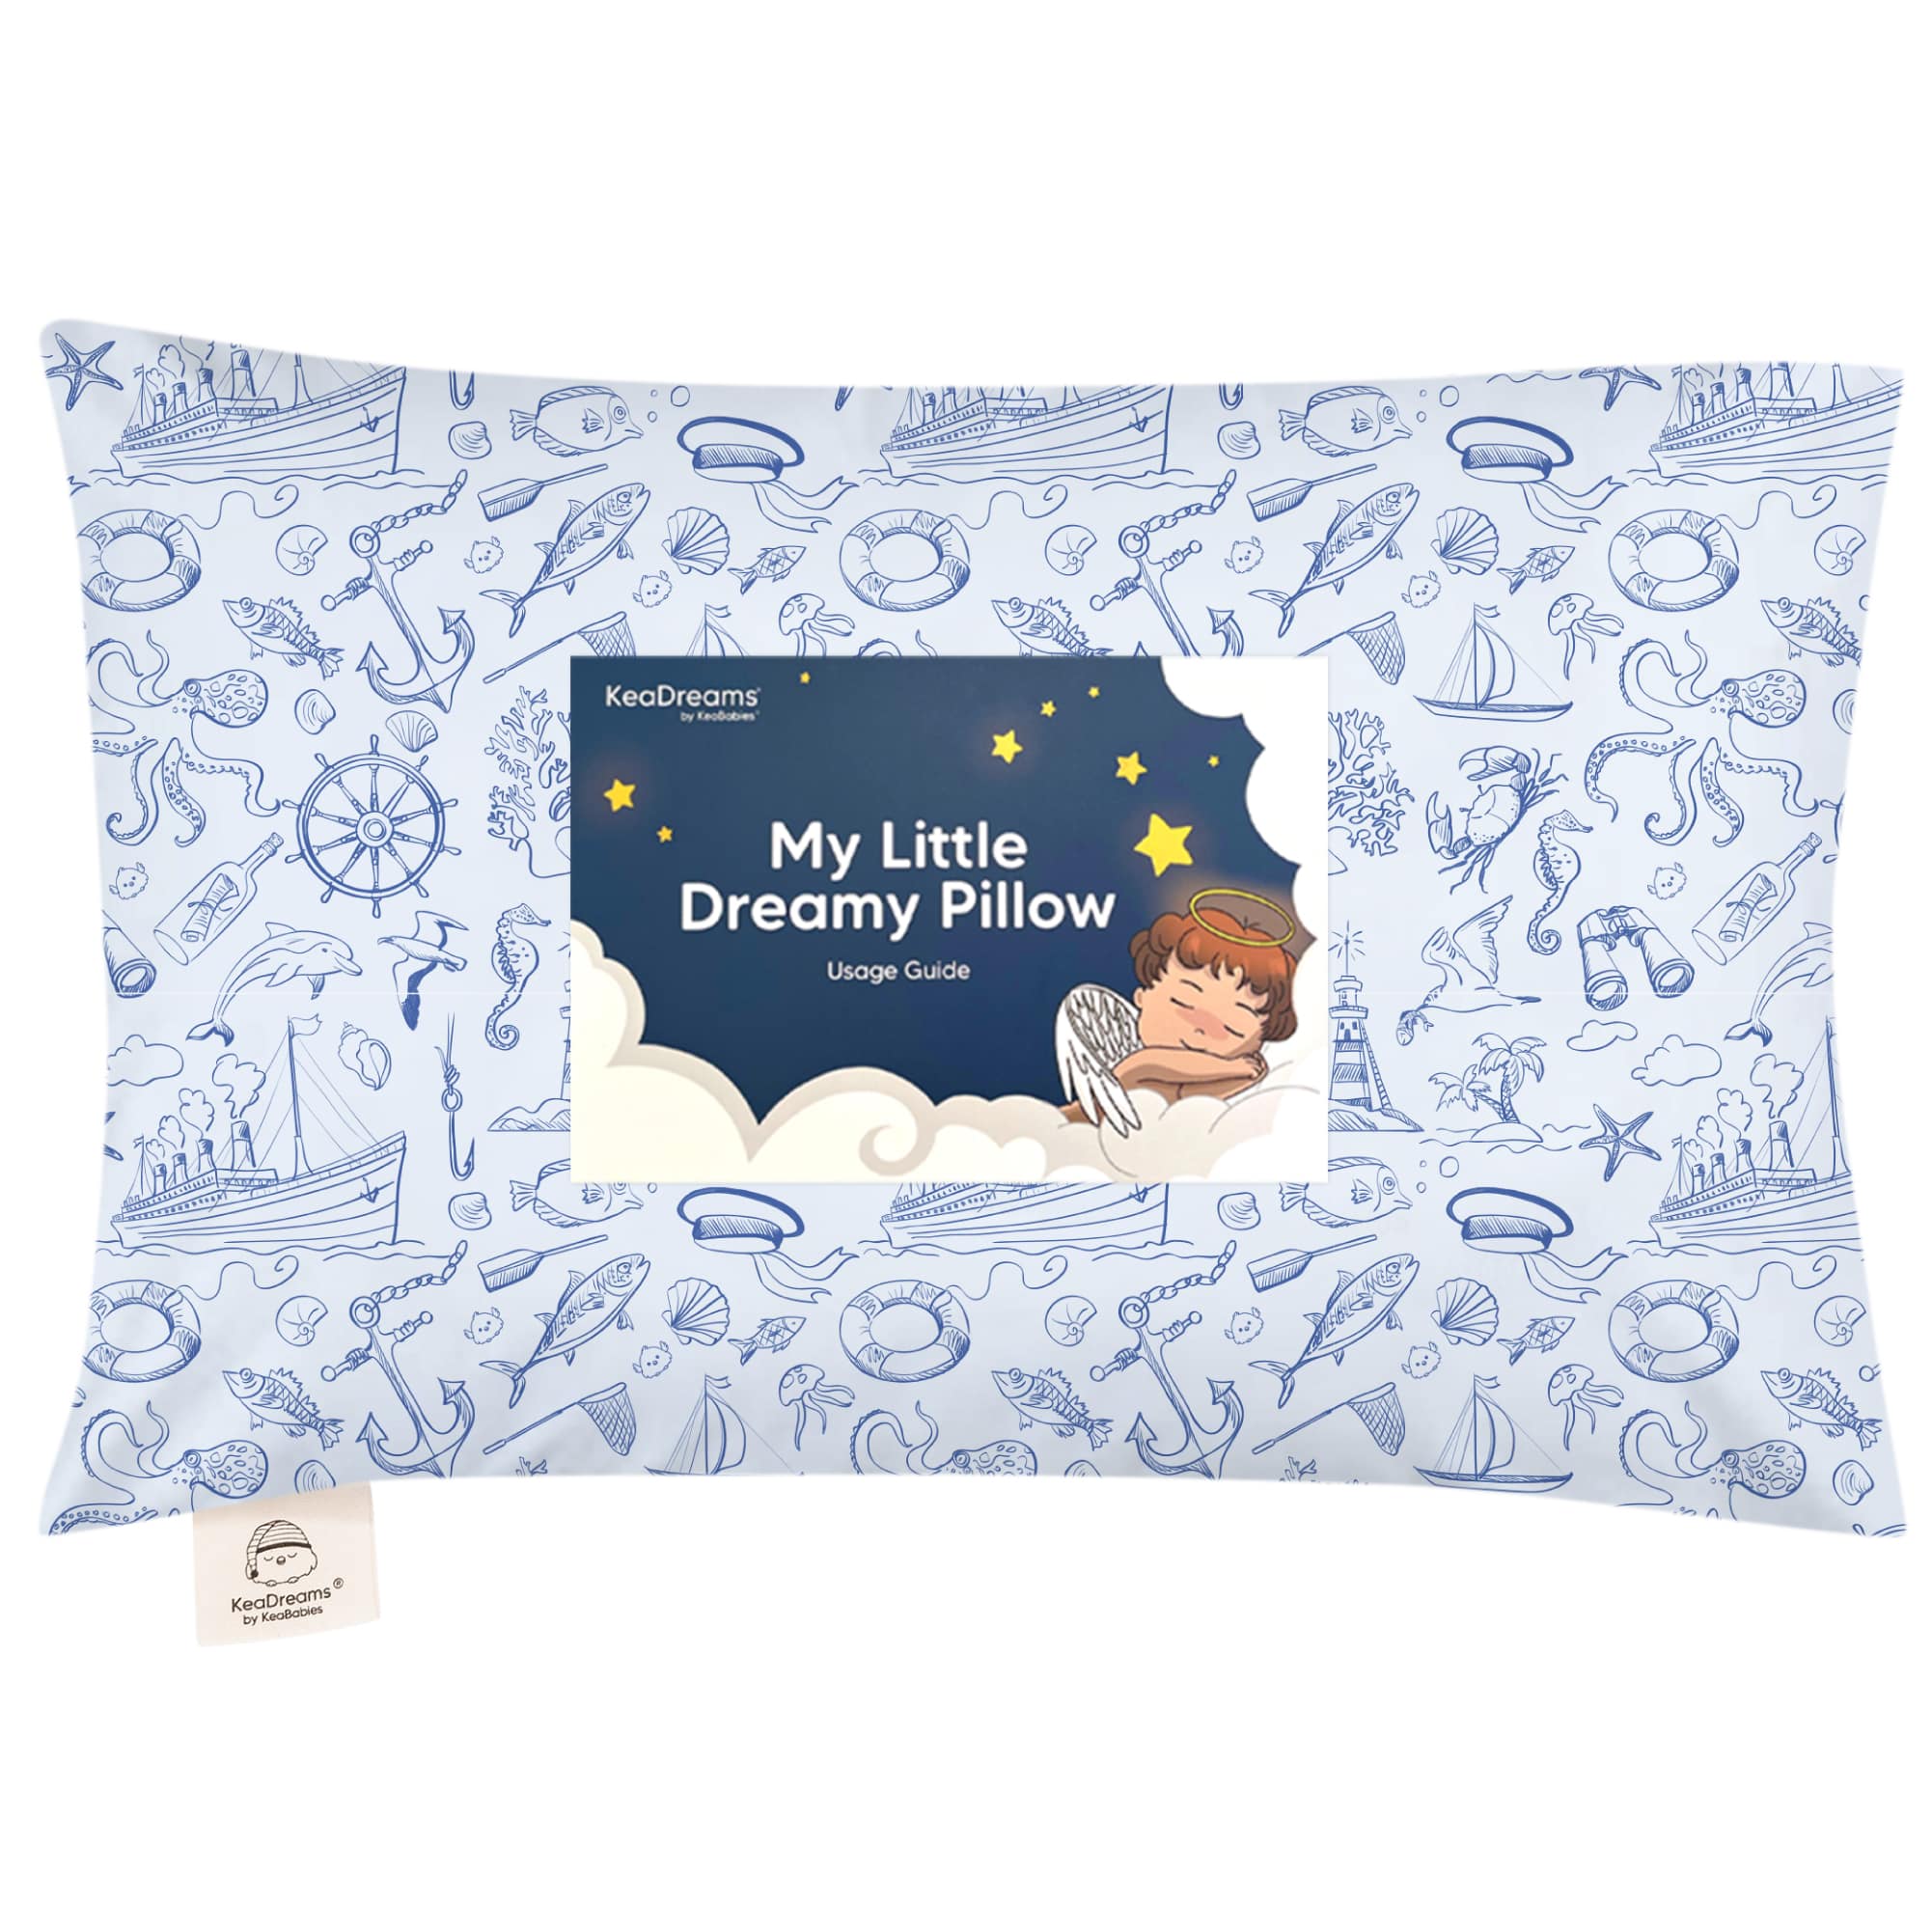 Toddler Pillow 13 x 18 Soft Hypoallergenic - Best Pillow for Kids! Better  Neck Support and Sleeping! Better Naps in Bed, a Crib, or at School! Makes